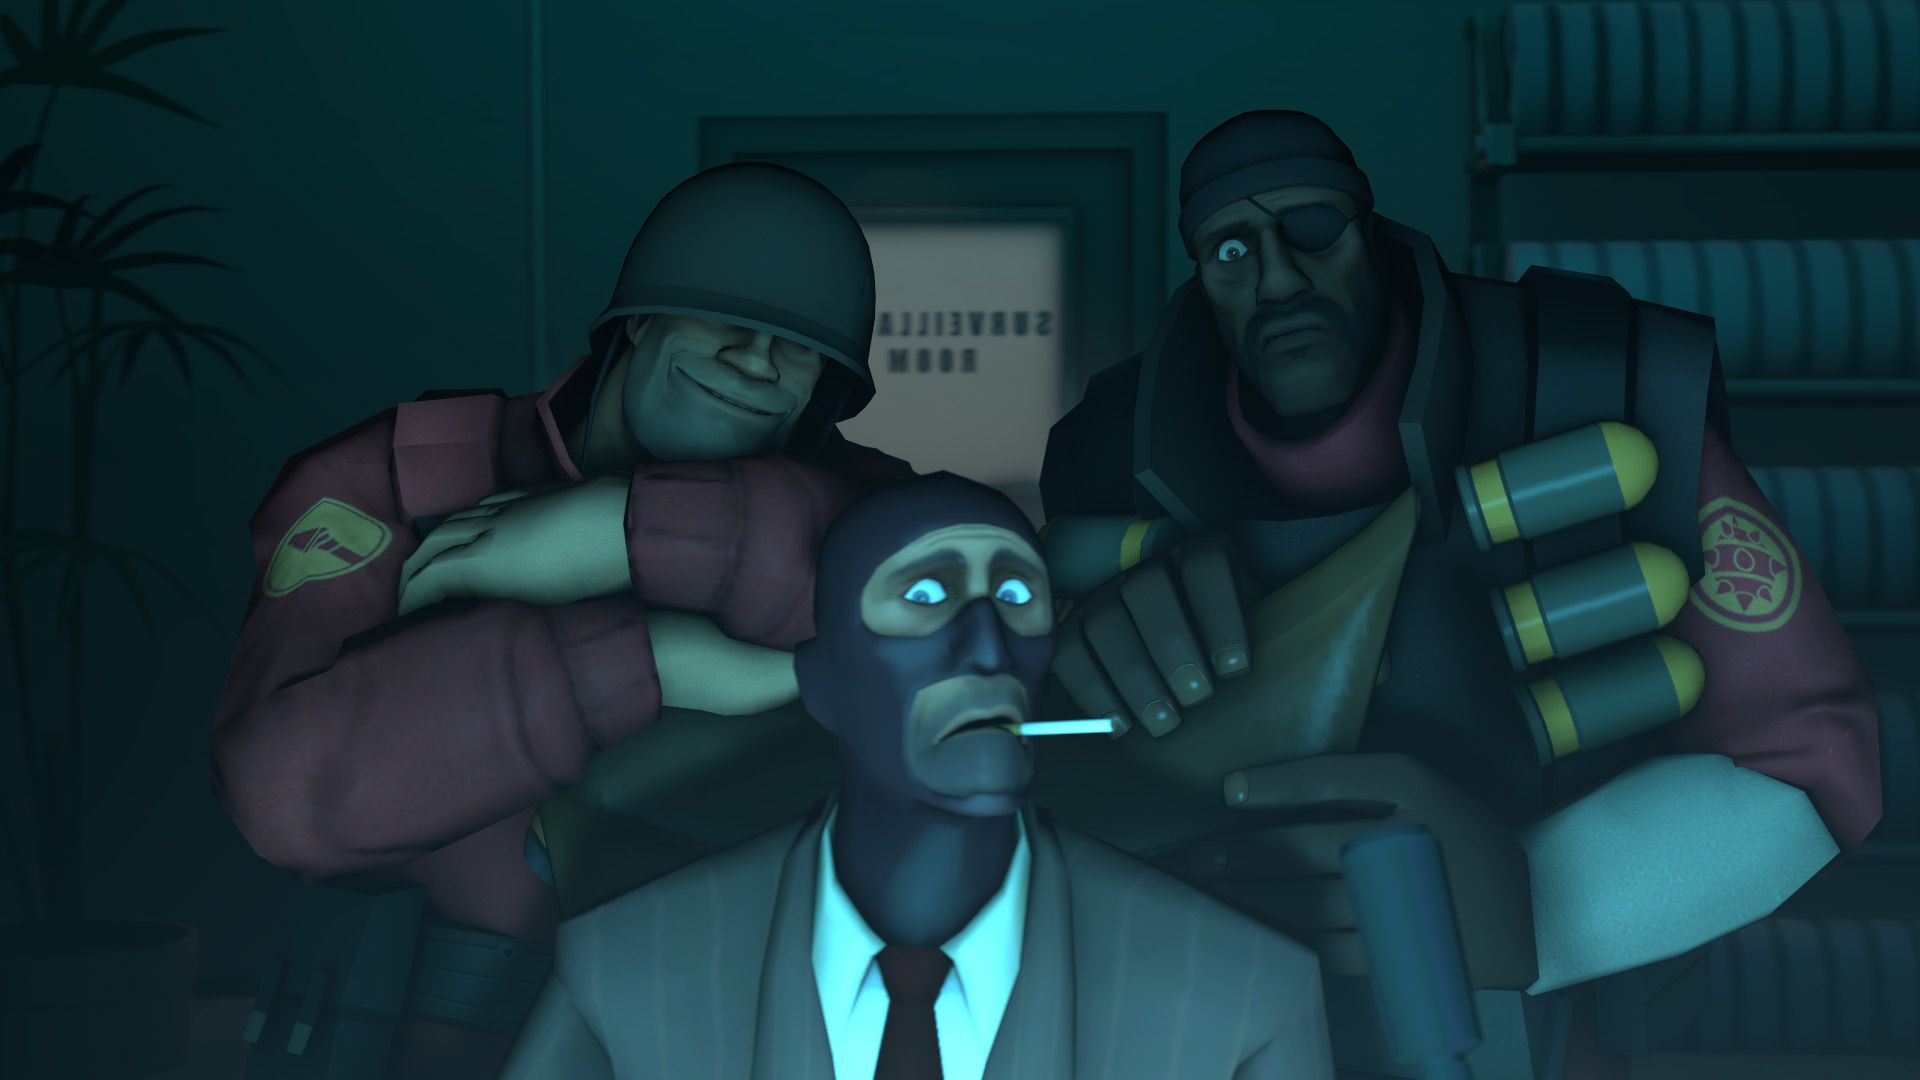 Can the Save TF2 petition rescue Valve's beloved game?